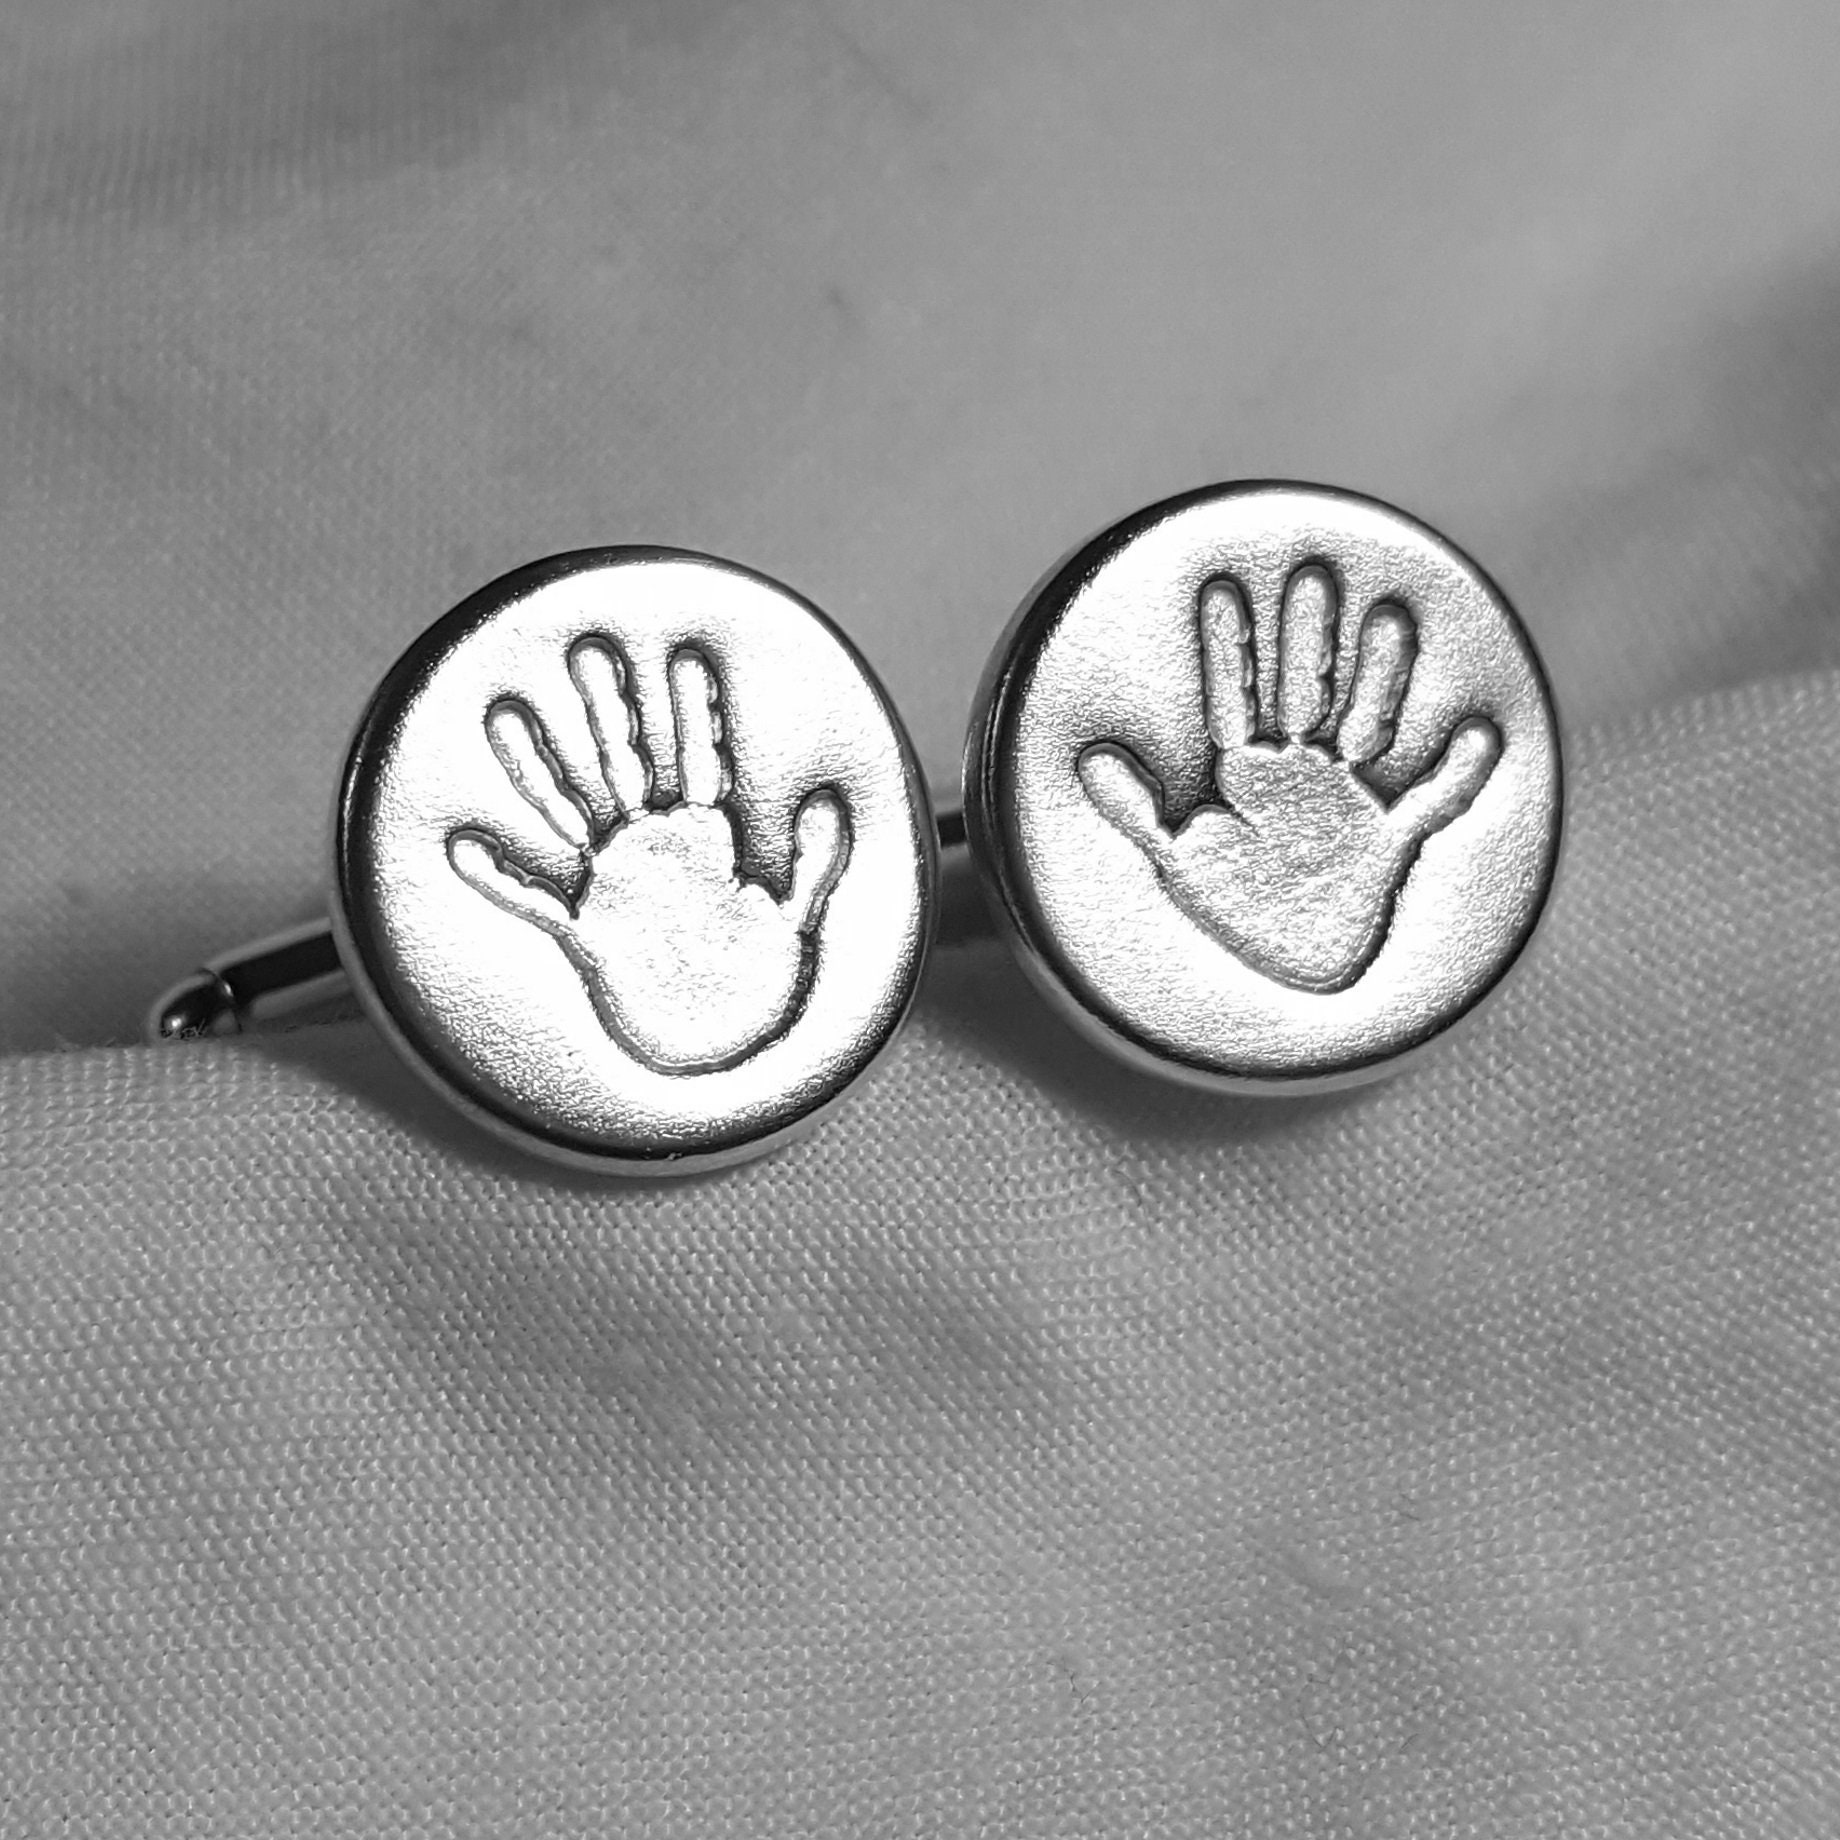 Handprint Cufflinks - Handprint Cuff Links Gifts For New Father Birthday Present Husband Personalised Cufflinks Father’s Day